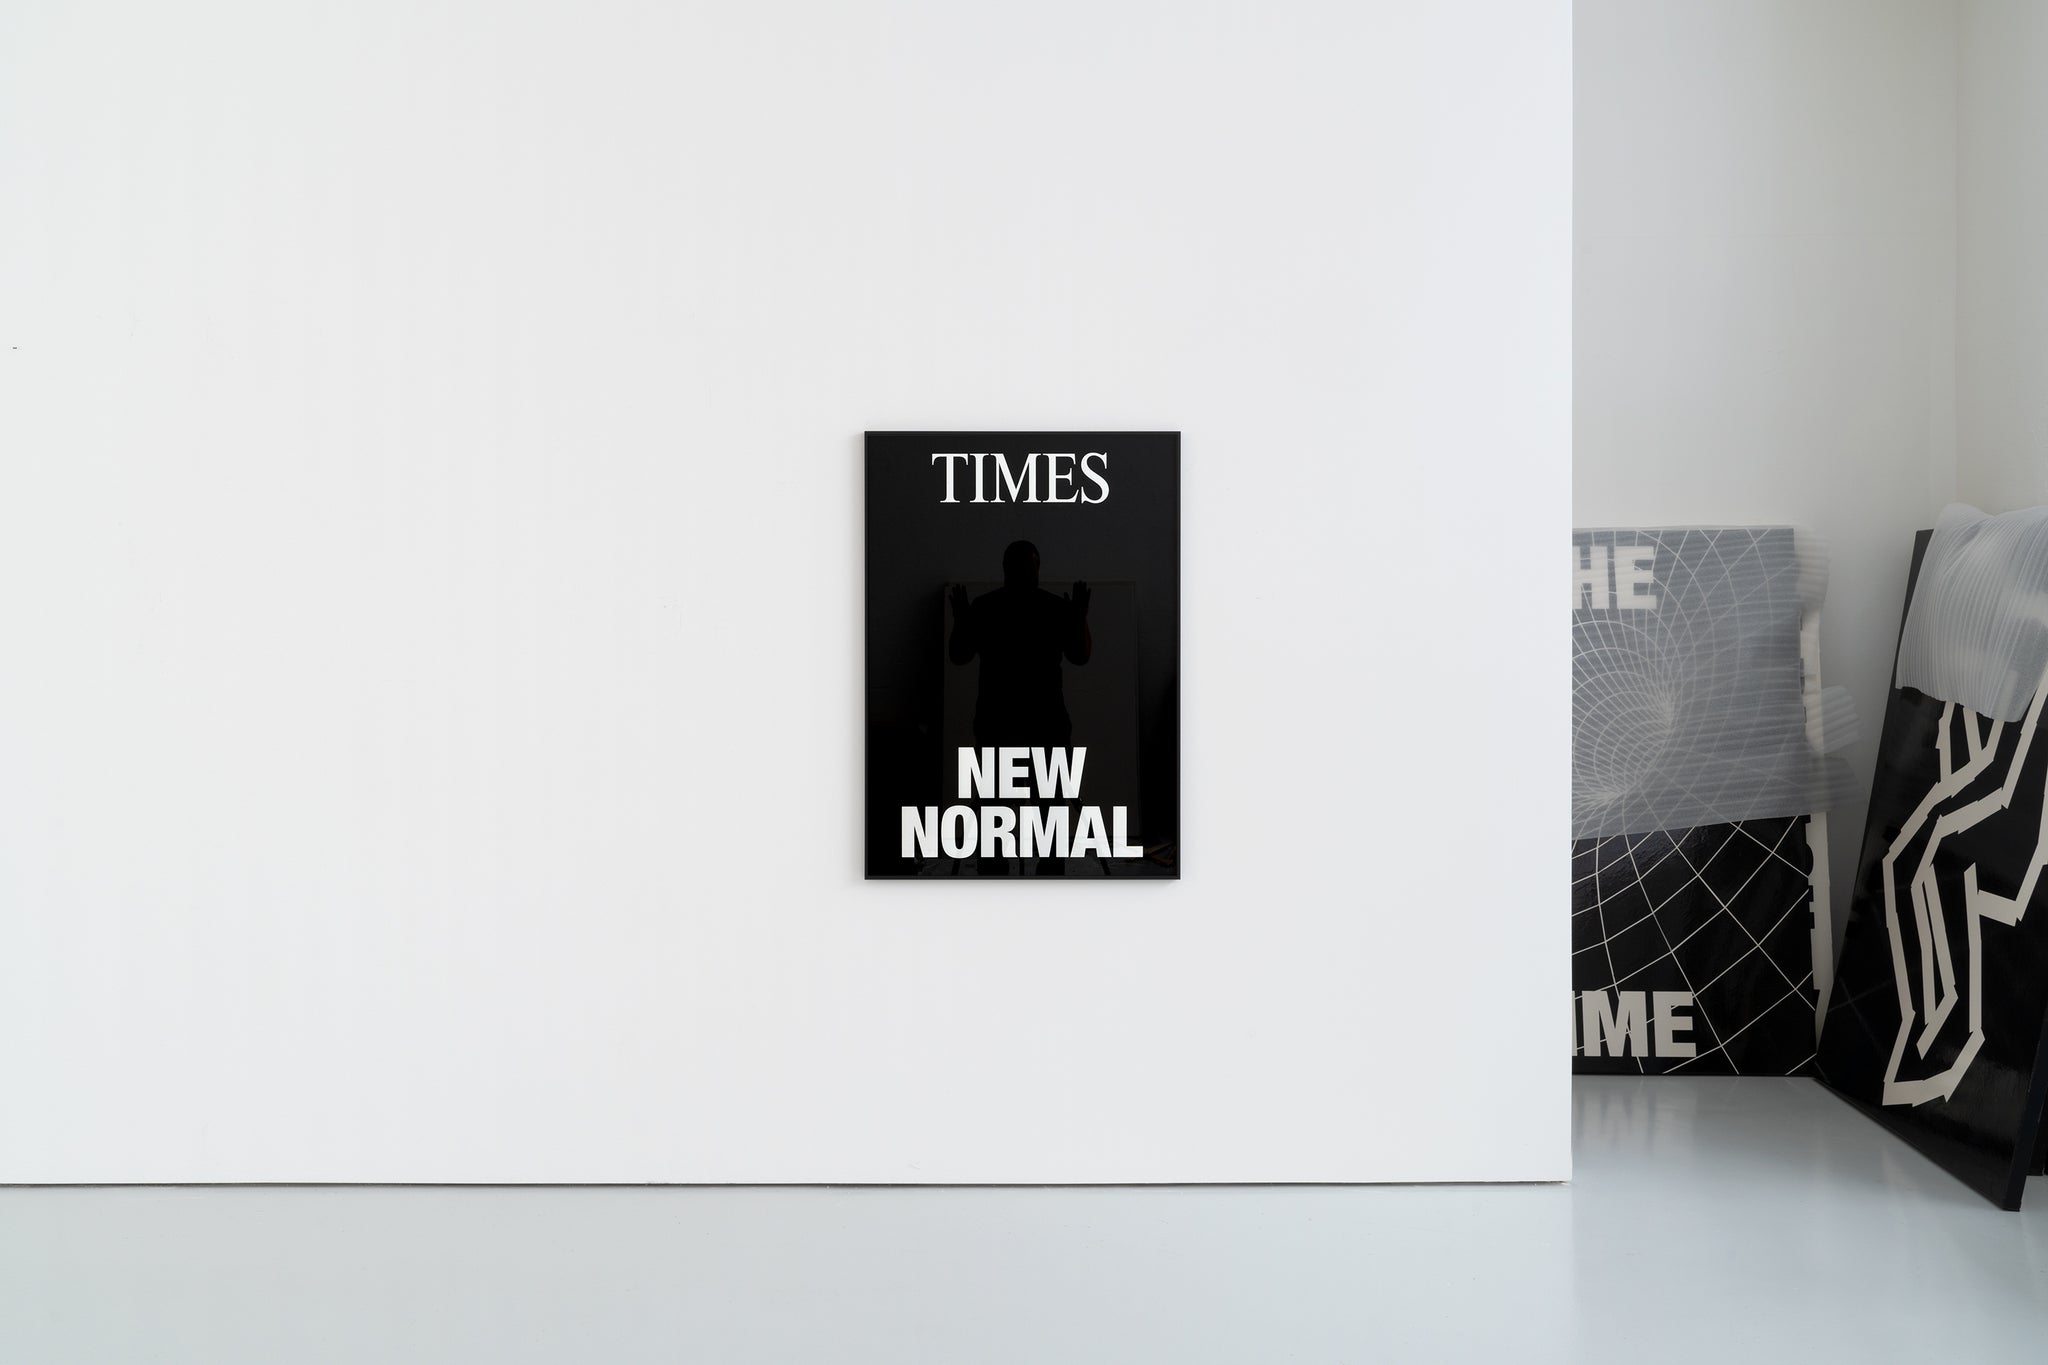 TIMES NEW NORMAL